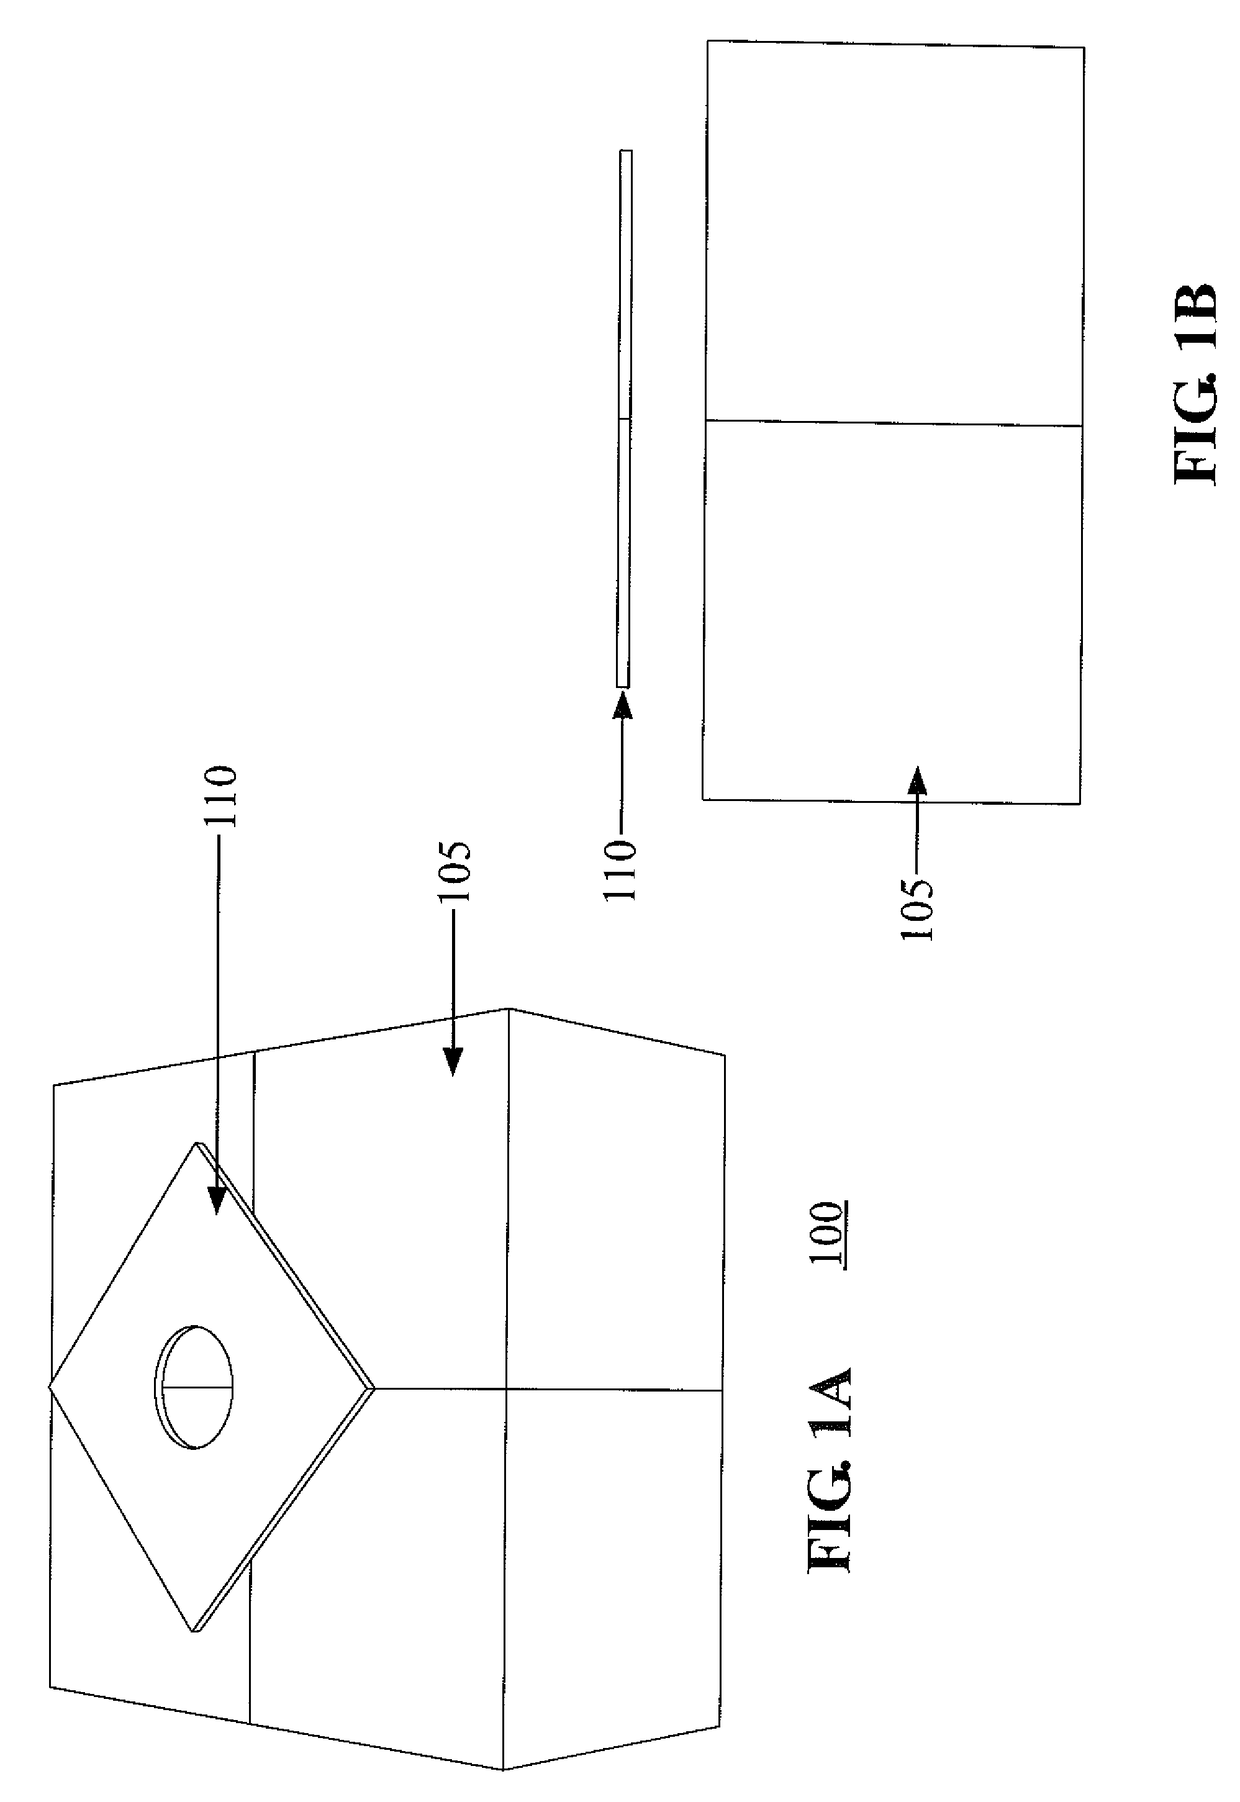 Method and system of using electromagnetism to control fertilizer leaching